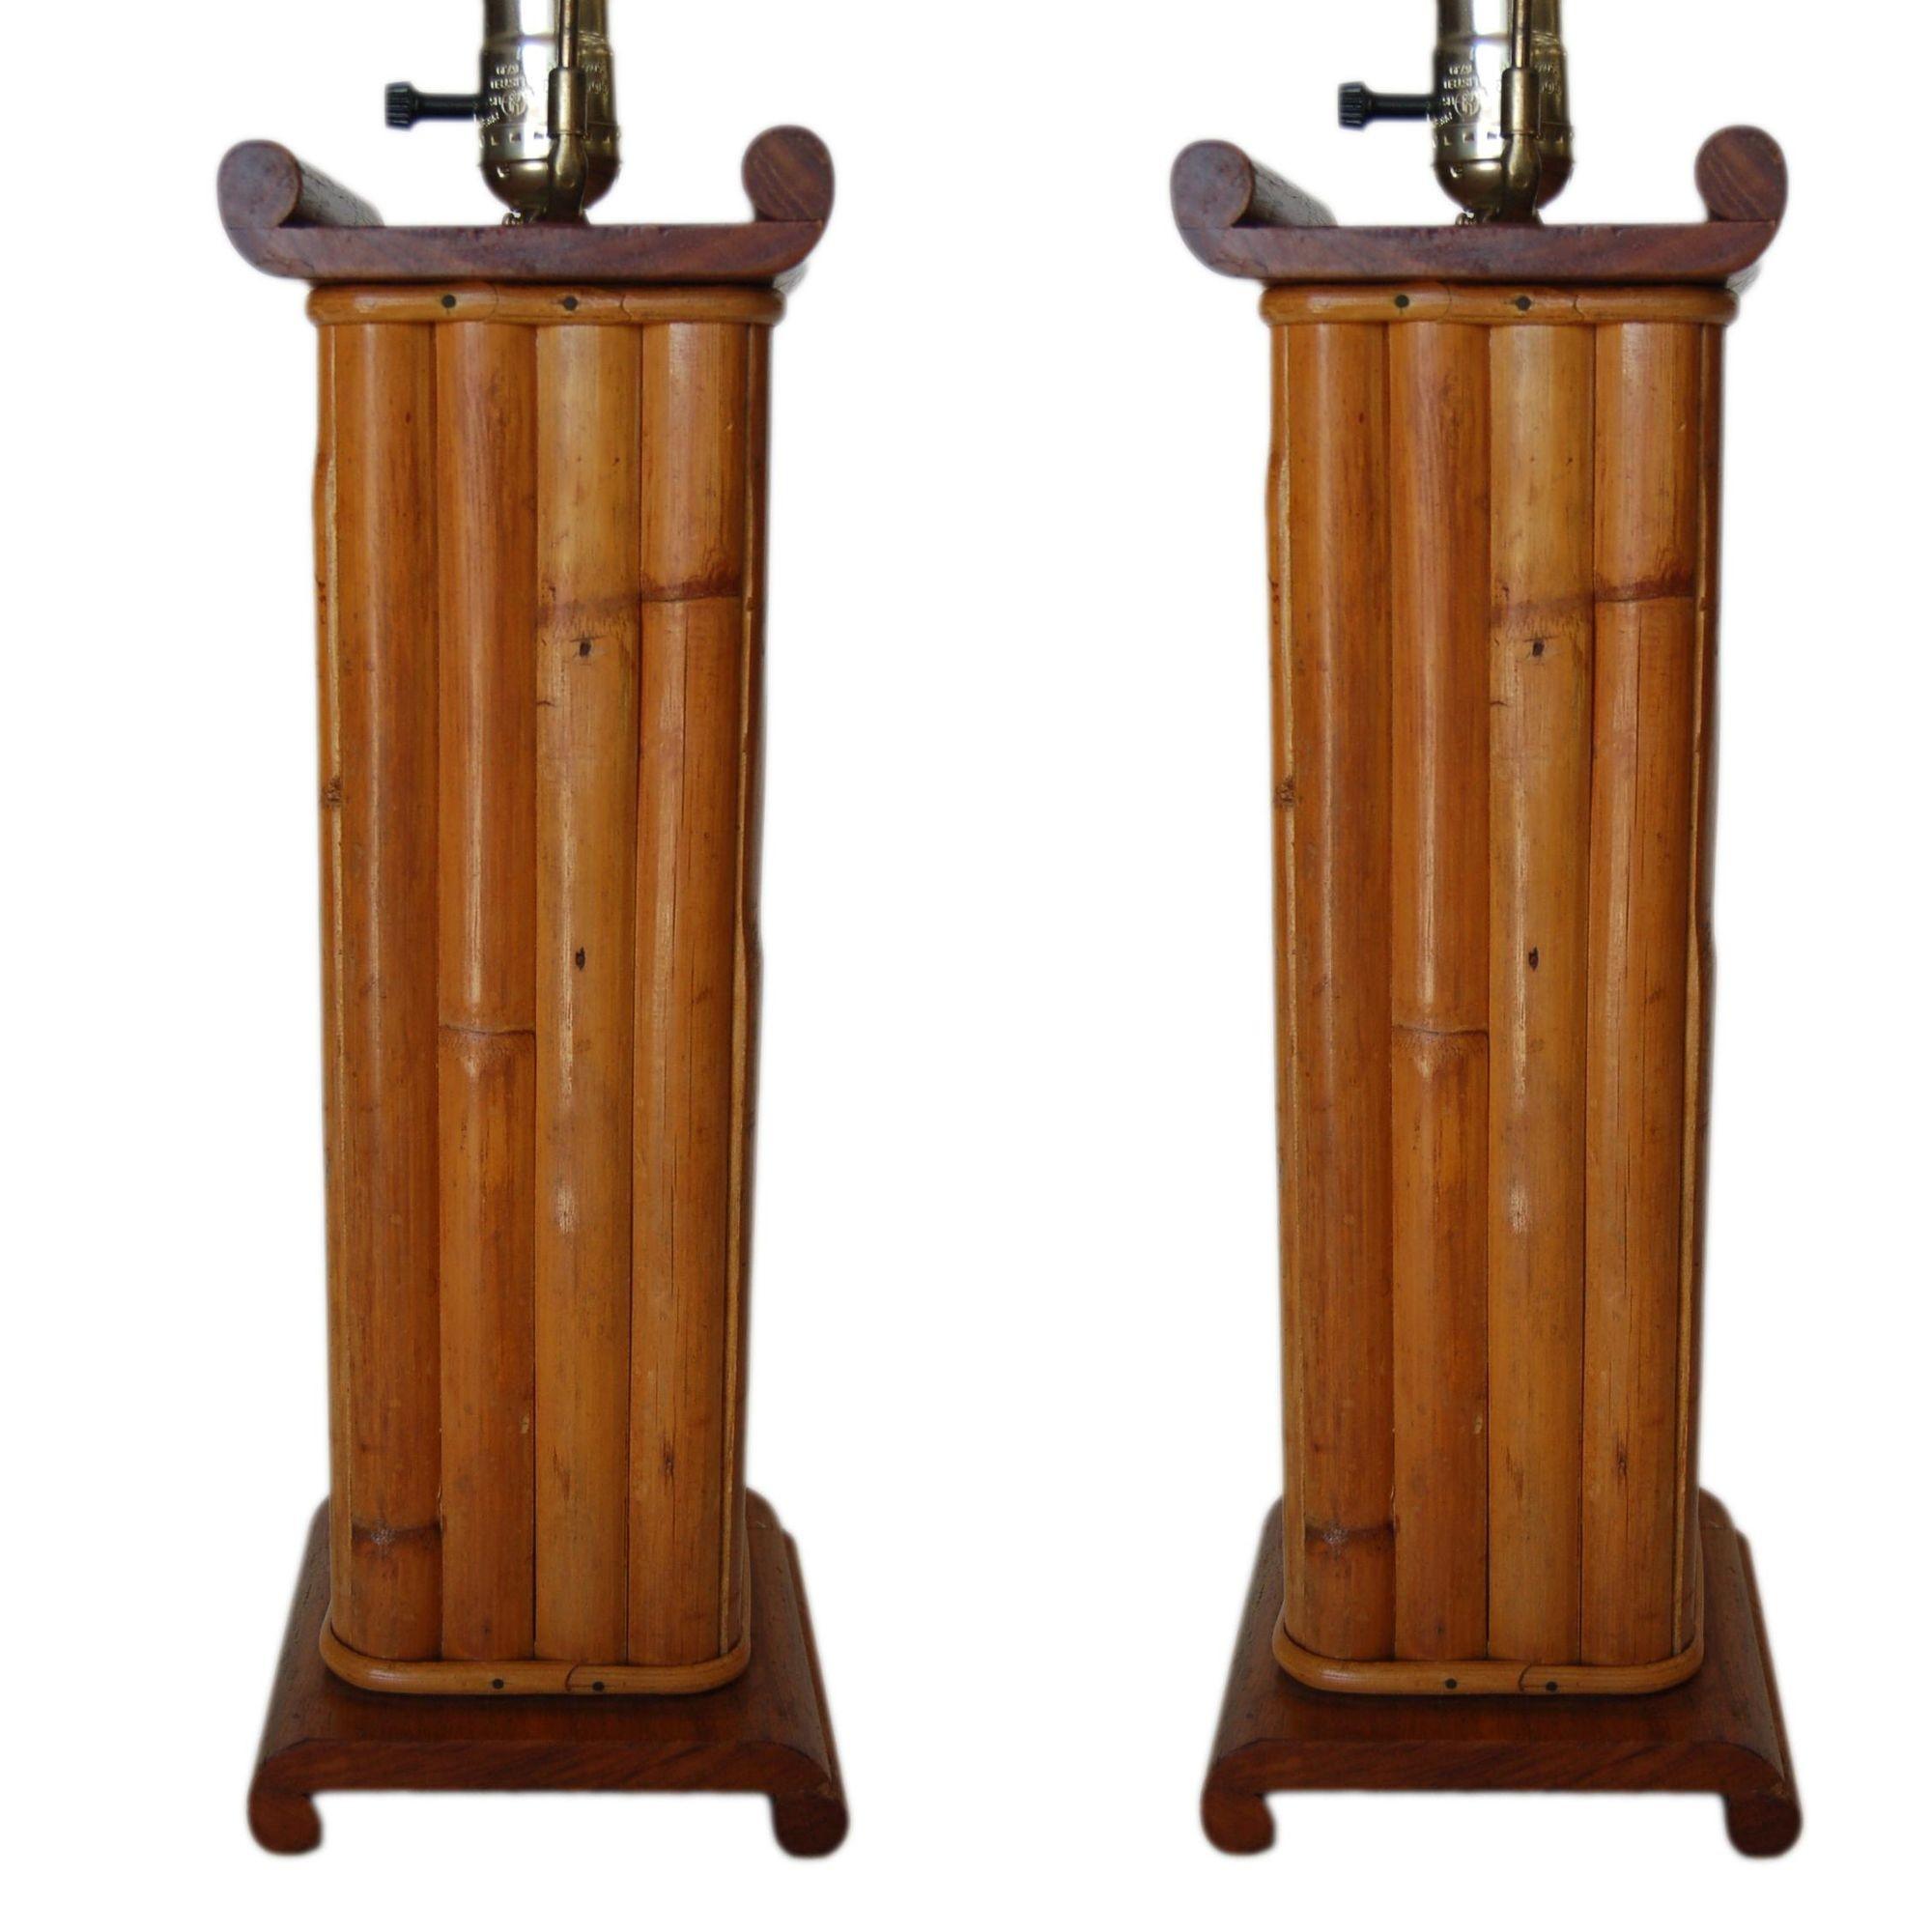 Pair of restored midcentury square scroll rattan table lamps featuring sixteen split decorative rattan poles fixed to a mahogany square top and base.

Measures 6